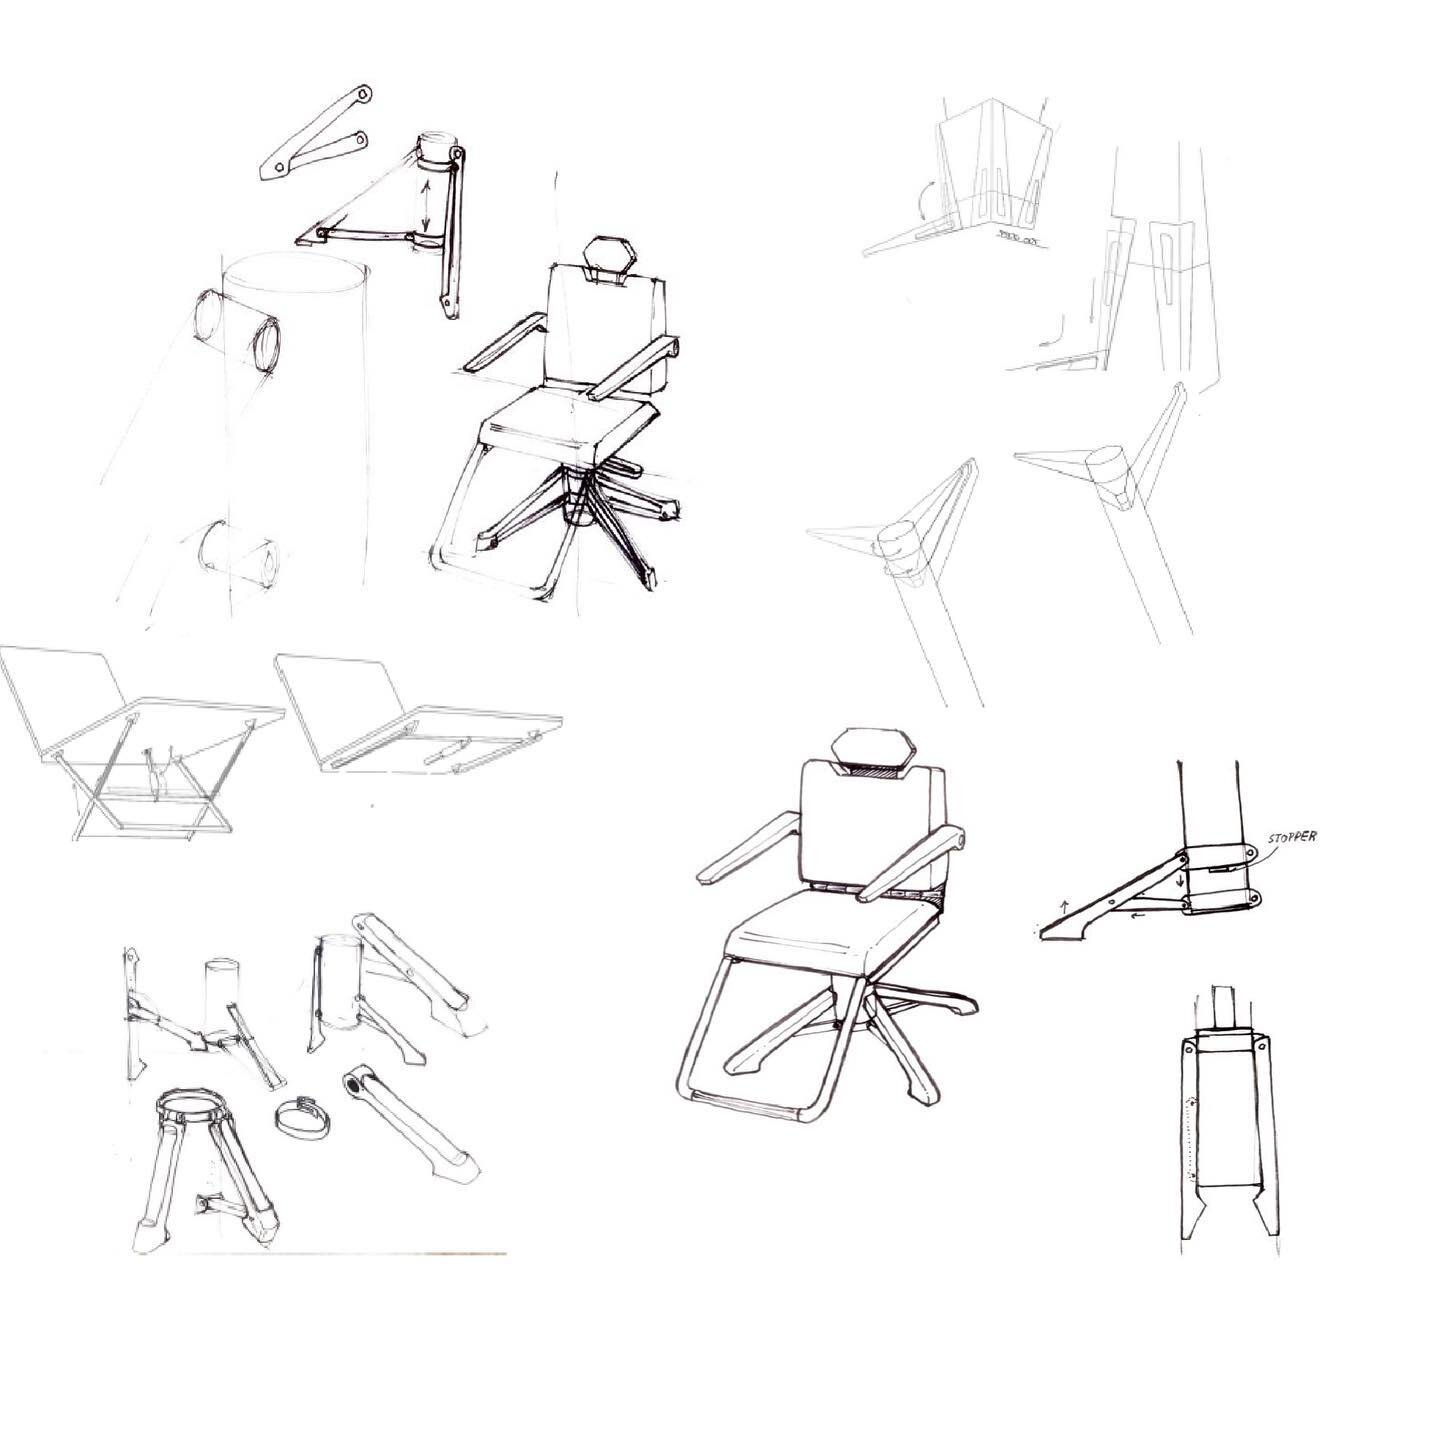 Phase 1 sketches of the rohver chair as two part assembly in the scissor lift and
tri-pod form.

PRE-ORDER NOW  www.nohmad.com 

🤔 Which sketch do you like best, scissor lift or tri-pod deployment?

r
o
h
v
e
r

#rohver #nohmad #makemoves
#mobilebar